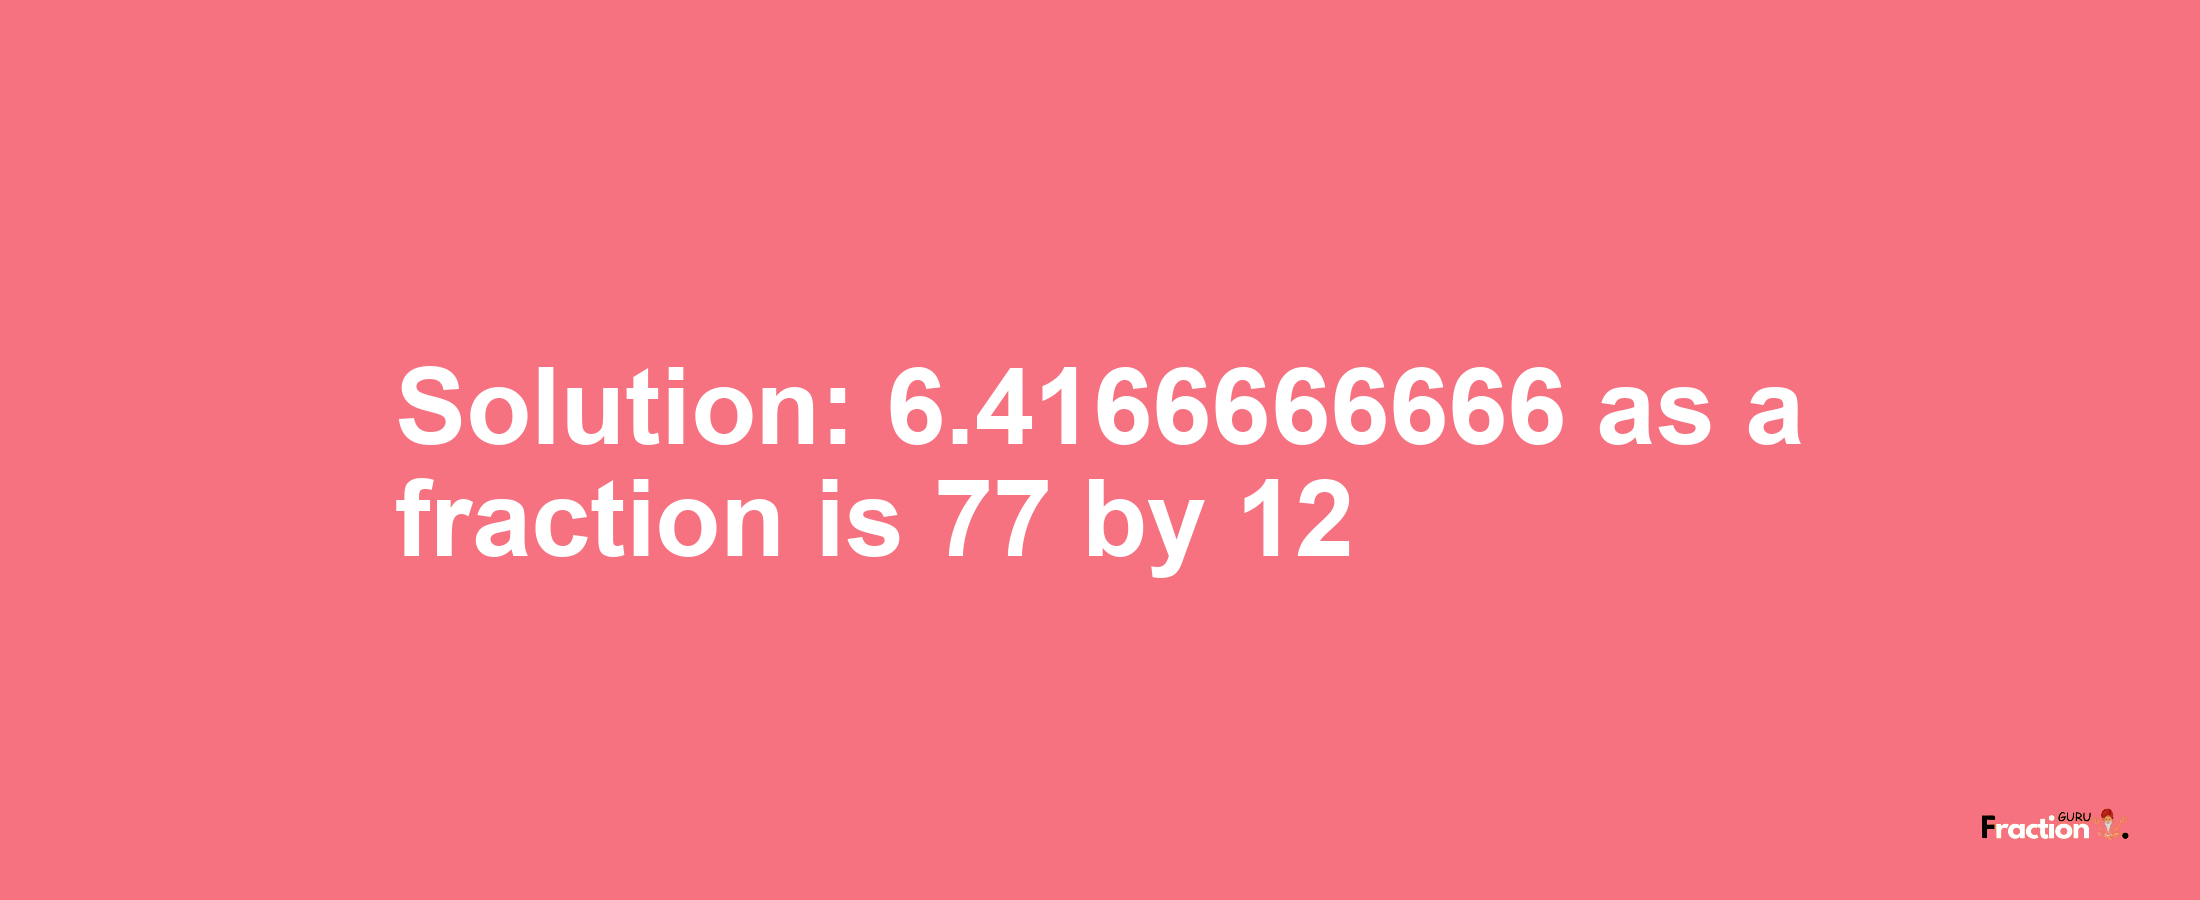 Solution:6.4166666666 as a fraction is 77/12